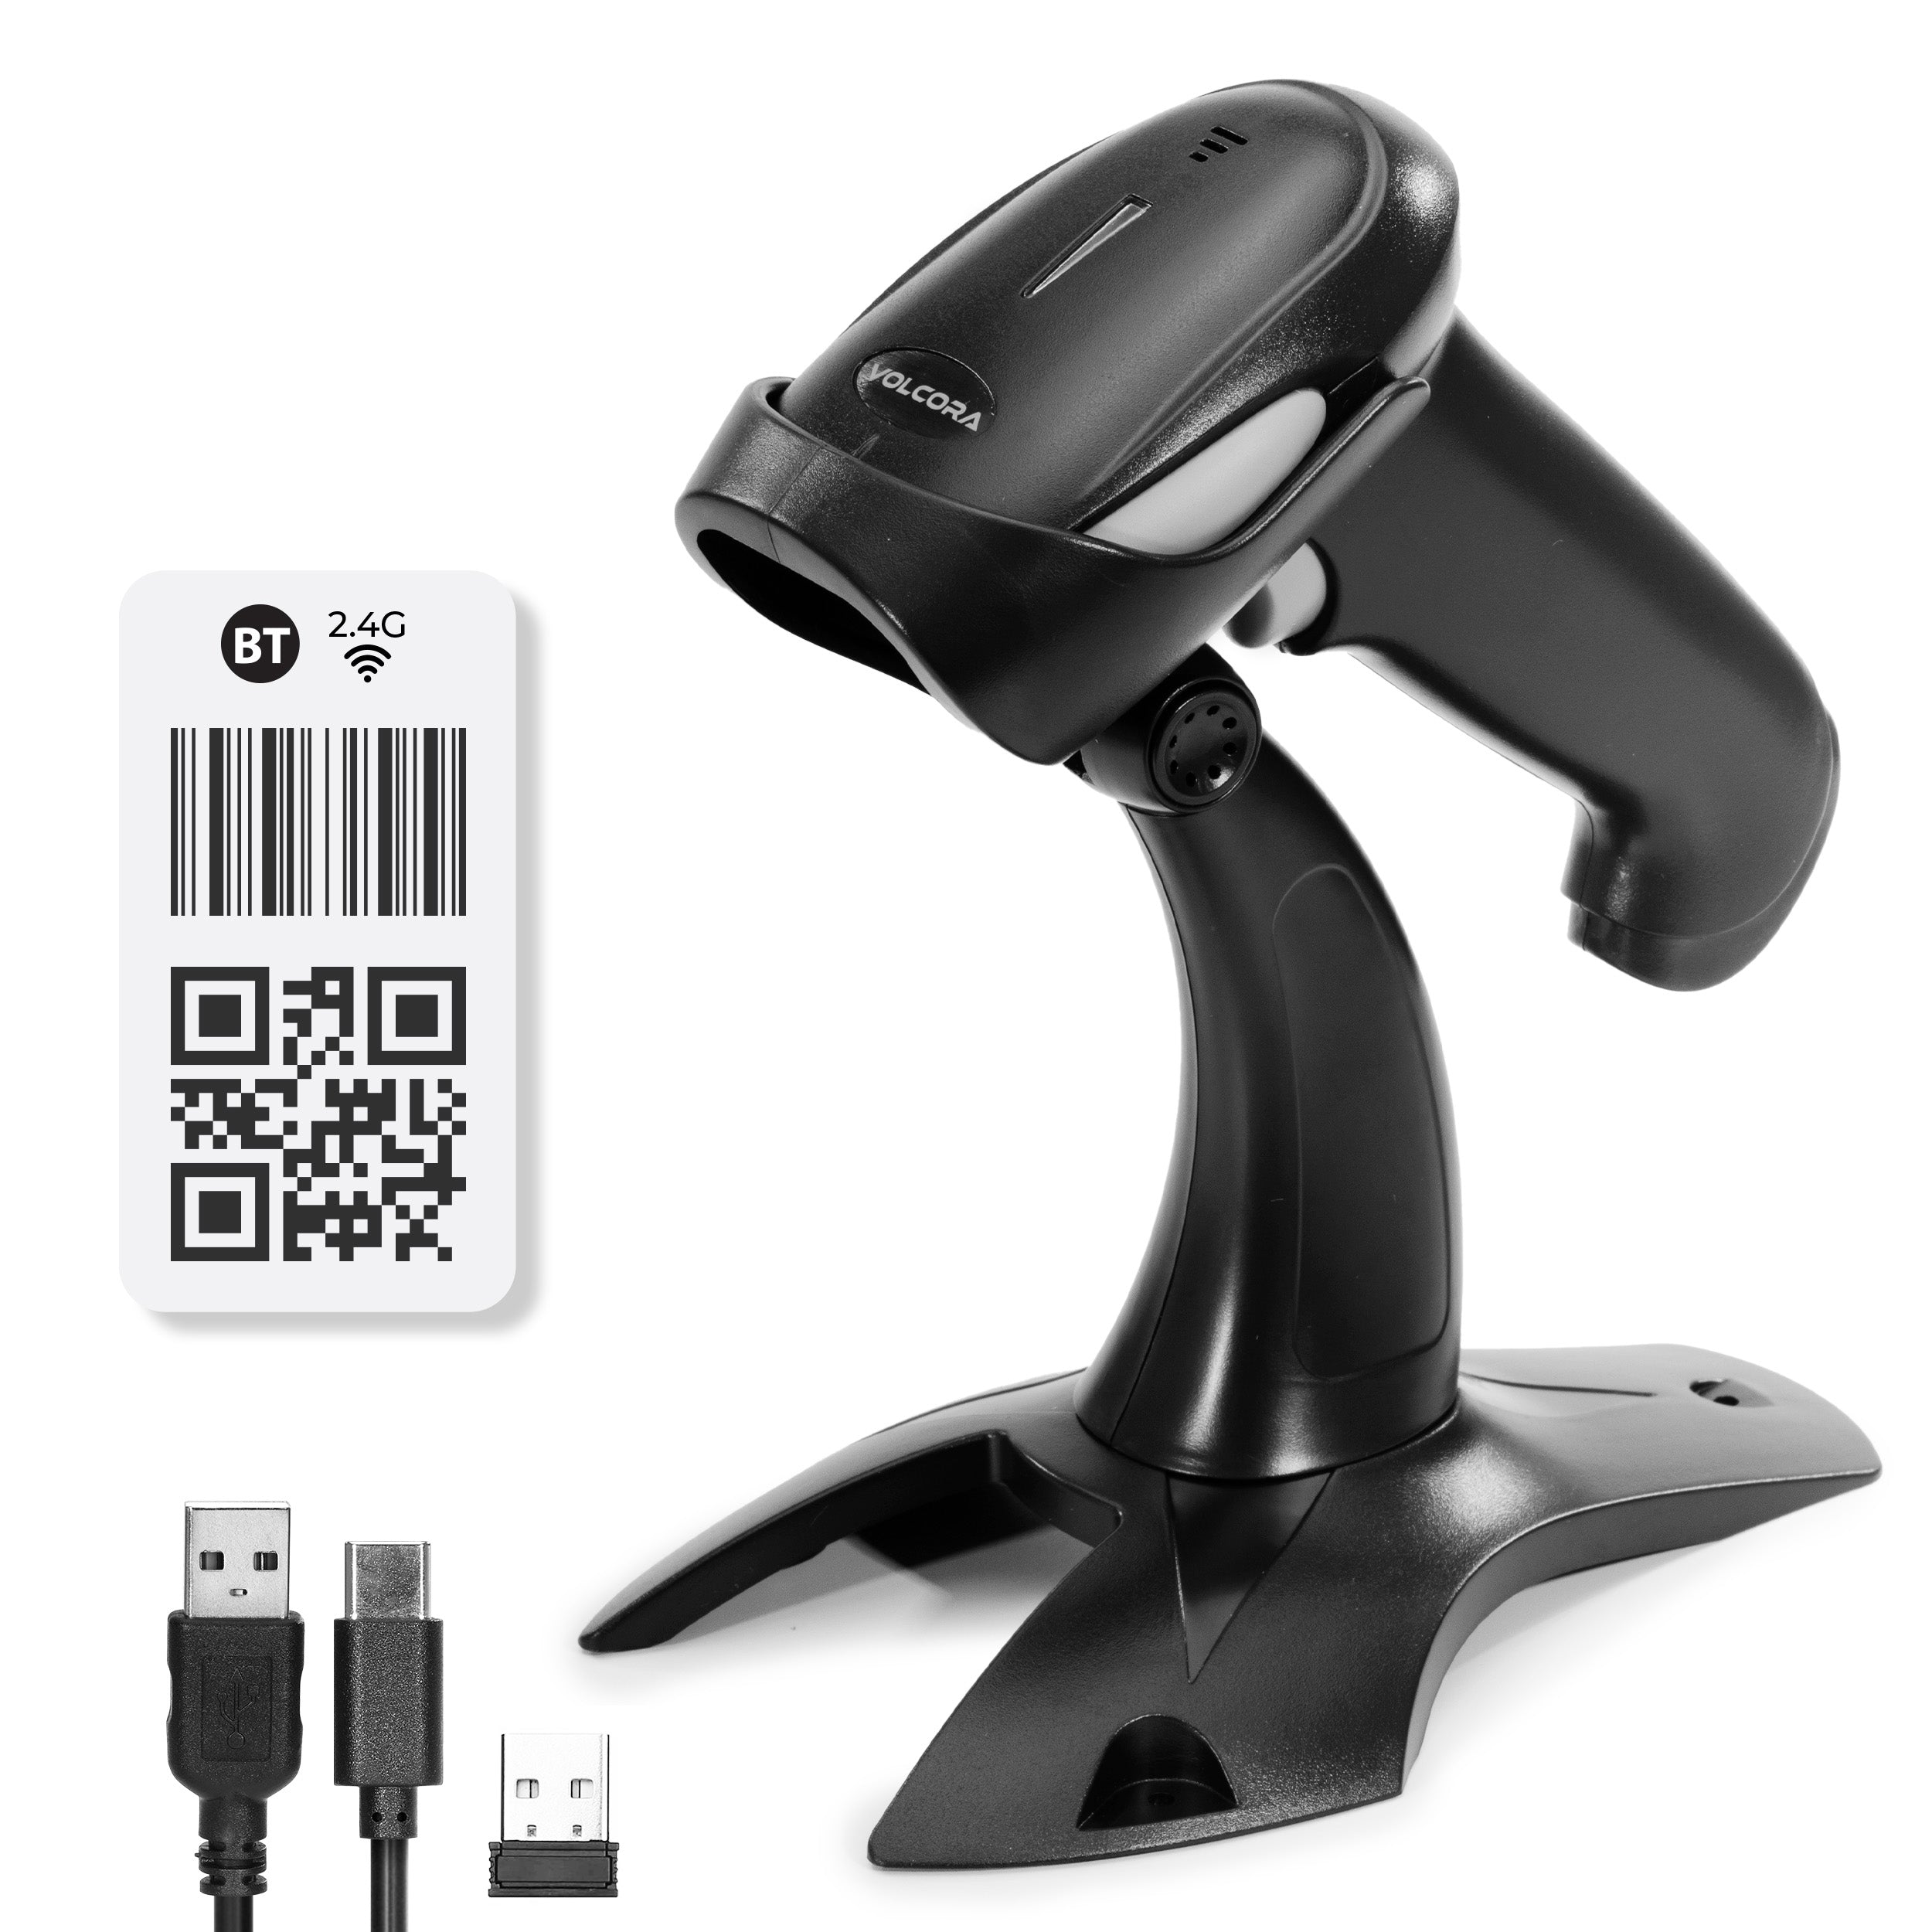 Barcode Scanners, Handheld Industrial Barcode Scanners in Stock